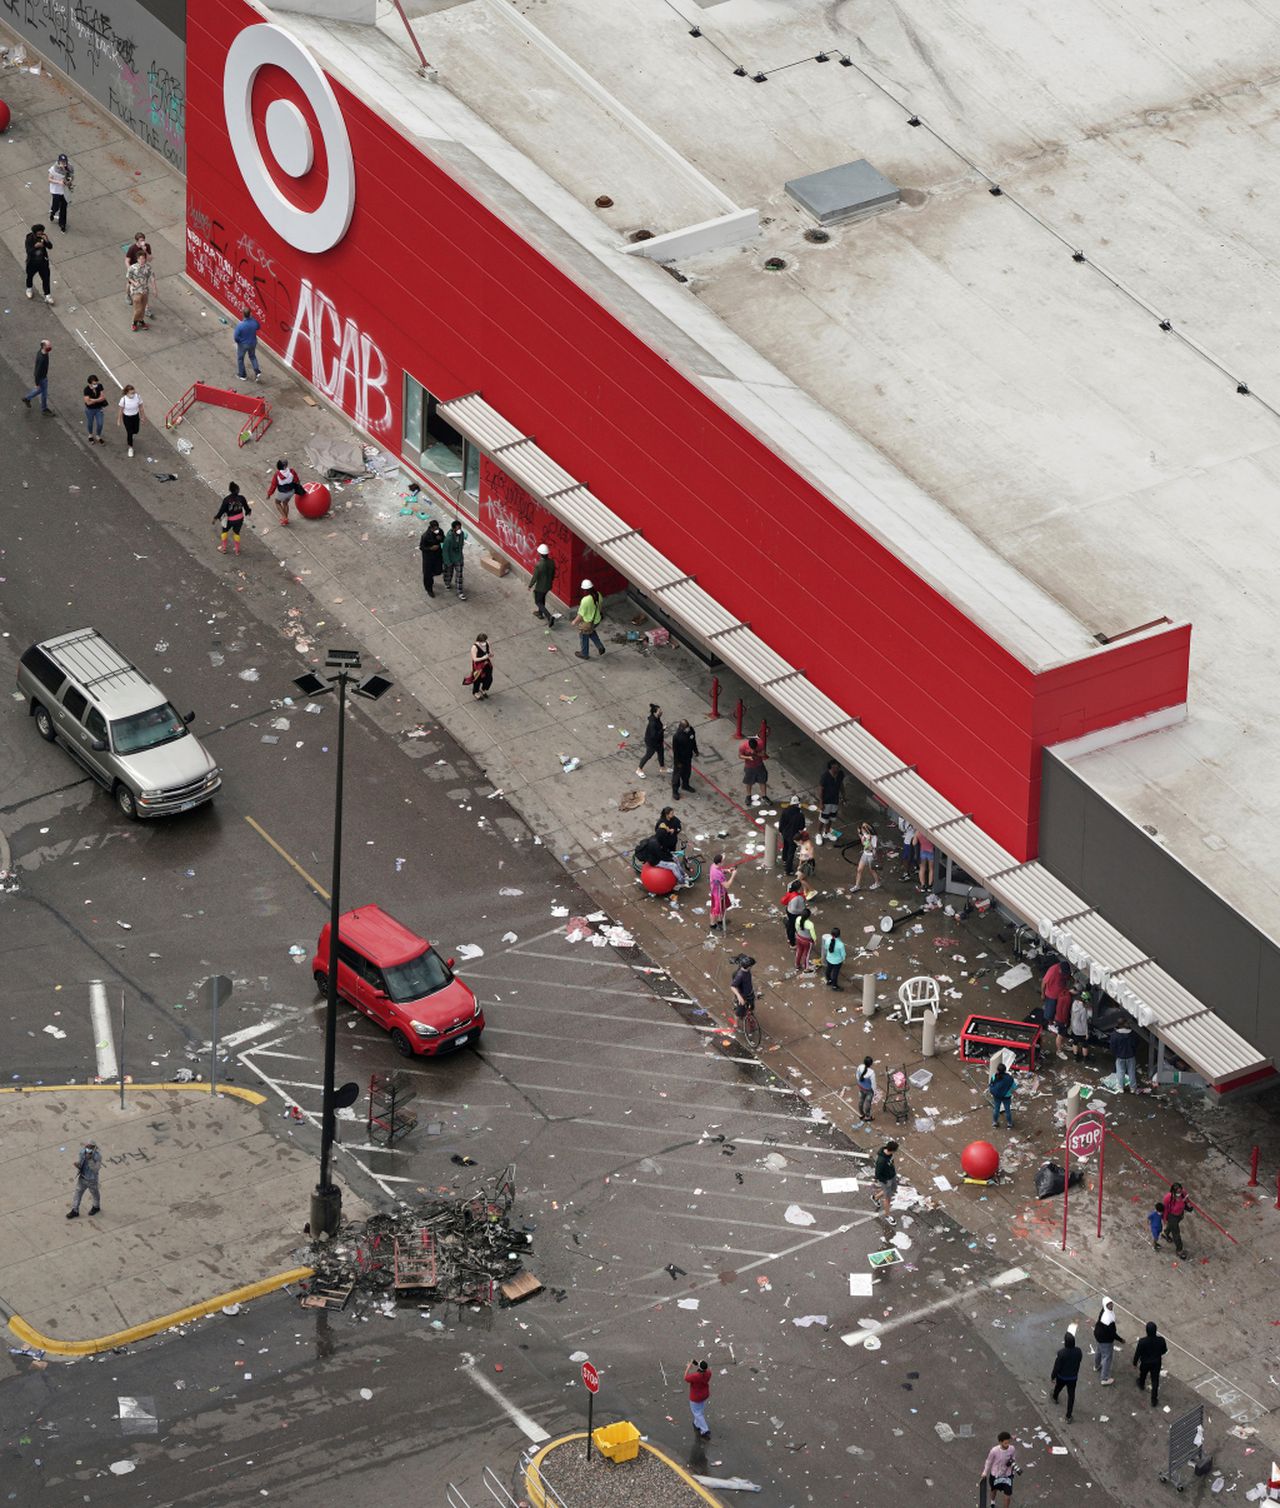 Target temporarily closes 23 Southern California stores amid protests